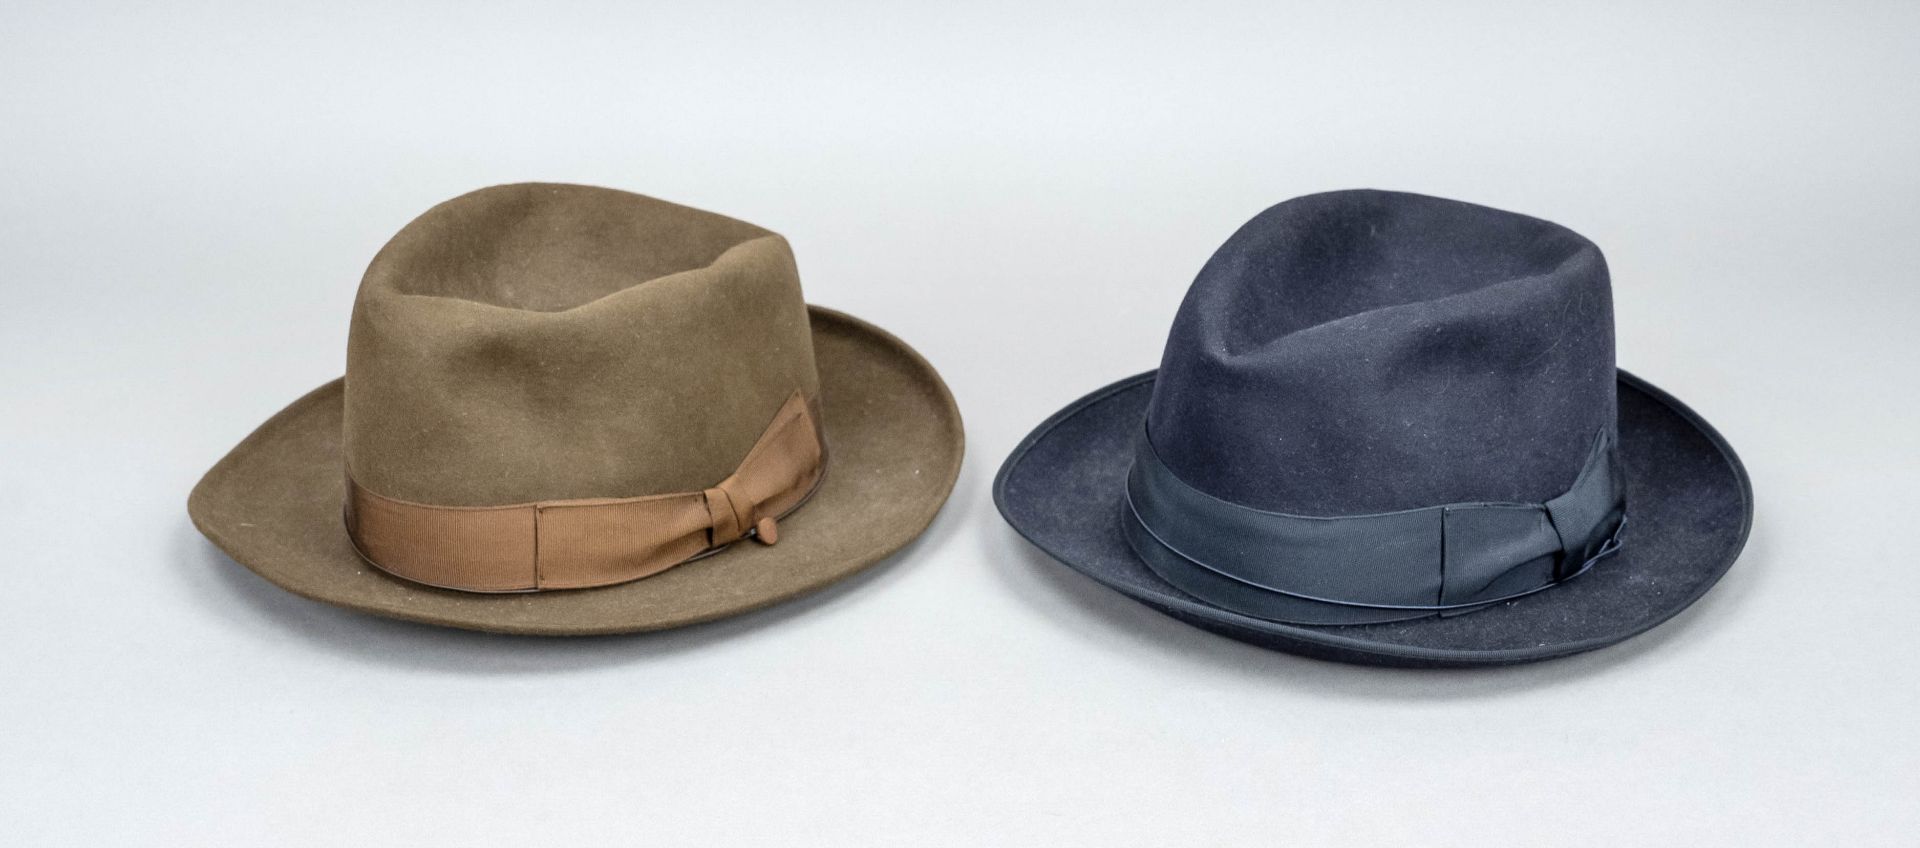 Borsalino, two classic men's hats, chocolate brown and black felt, size 57 and 58 respectively,